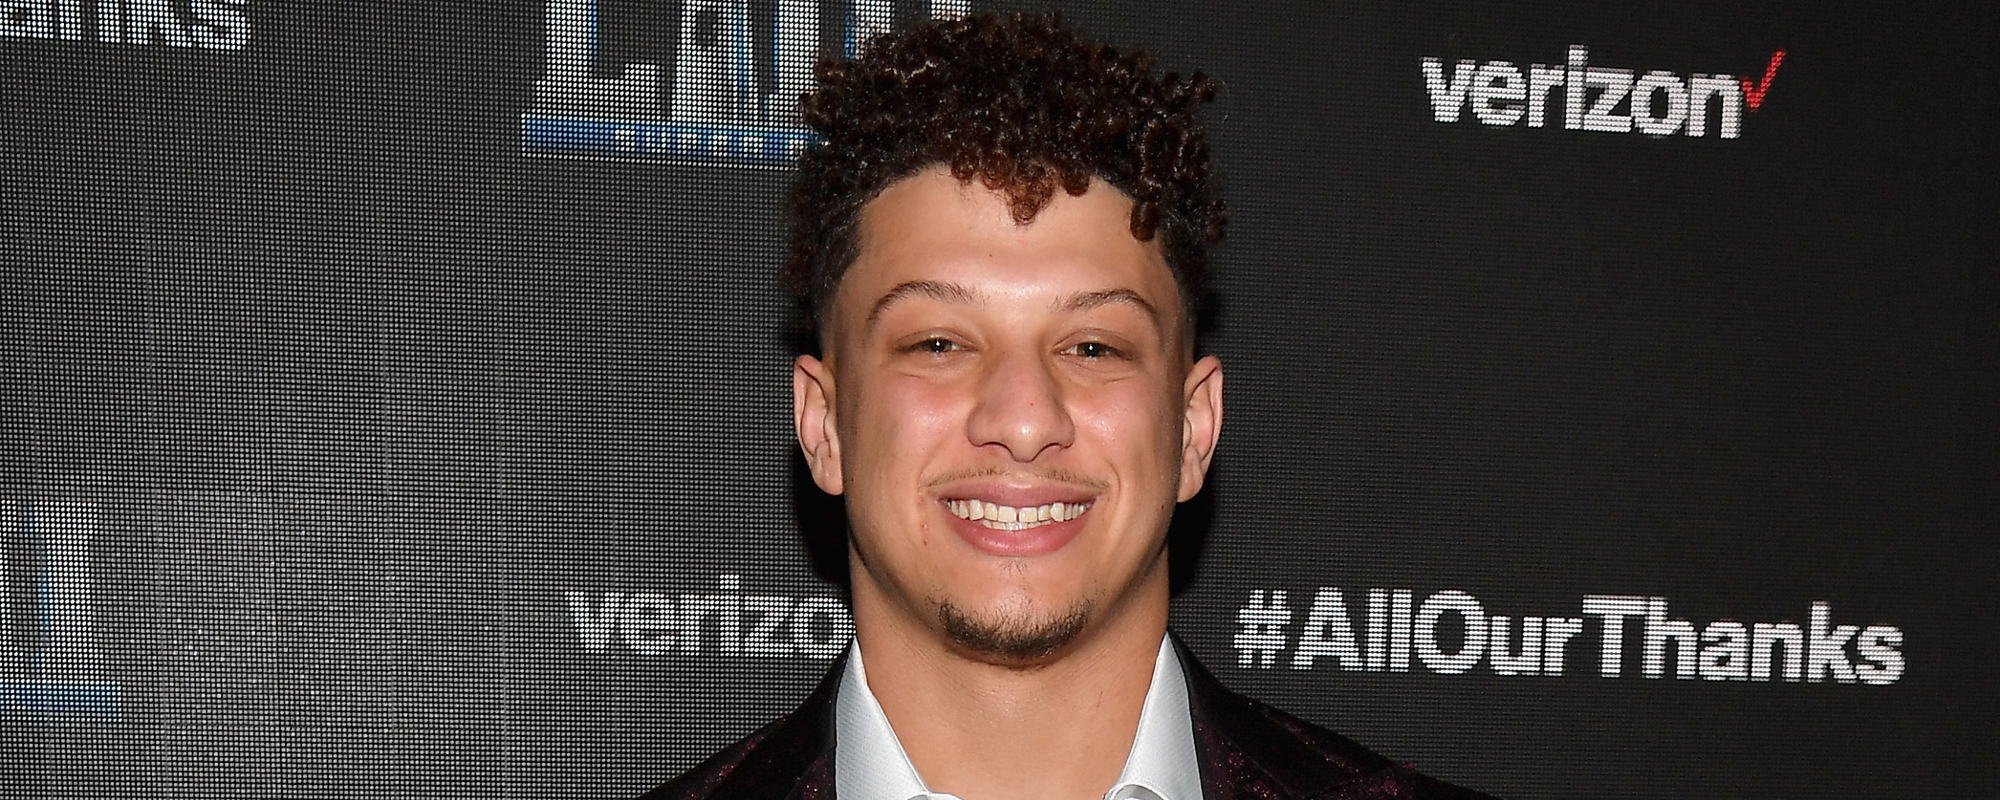 NFL Fans Roast Patrick Mahomes Over Taylor Swift Comment Amid Travis Kelce Romance